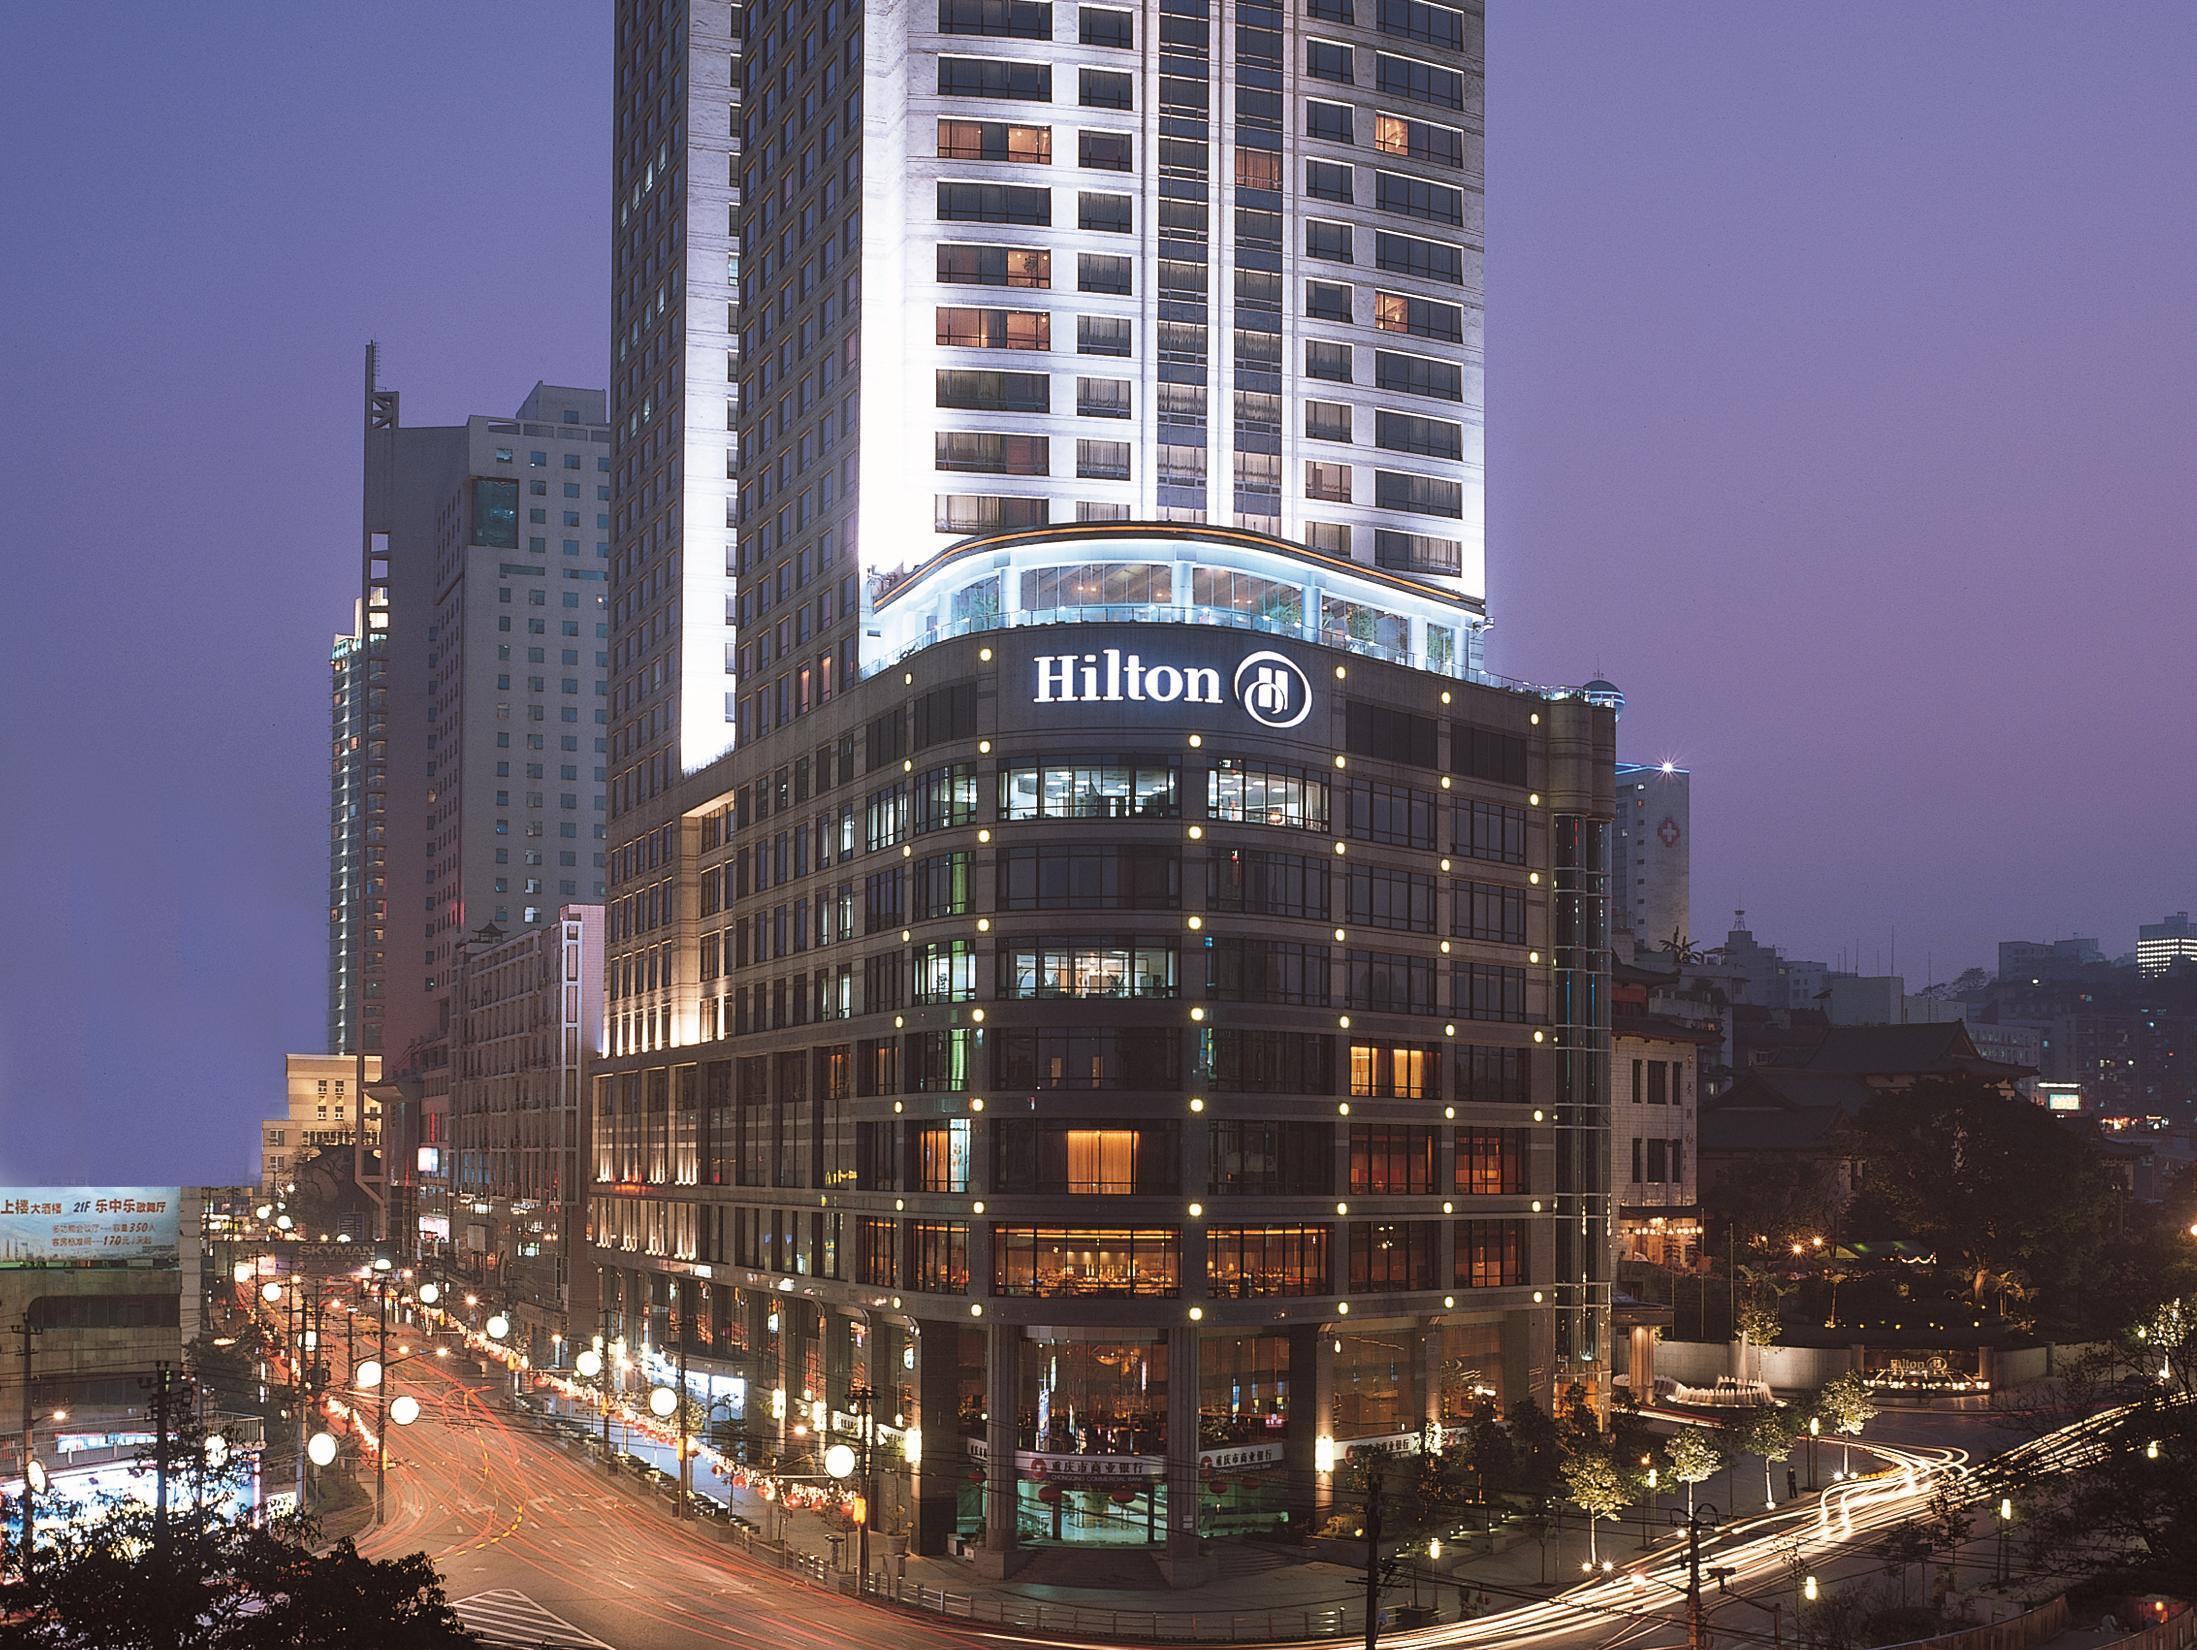 Hilton Chongqing Hotel Chongqing FAQ 2016, What facilities are there in Hilton Chongqing Hotel Chongqing 2016, What Languages Spoken are Supported in Hilton Chongqing Hotel Chongqing 2016, Which payment cards are accepted in Hilton Chongqing Hotel Chongqing , Chongqing Hilton Chongqing Hotel room facilities and services Q&A 2016, Chongqing Hilton Chongqing Hotel online booking services 2016, Chongqing Hilton Chongqing Hotel address 2016, Chongqing Hilton Chongqing Hotel telephone number 2016,Chongqing Hilton Chongqing Hotel map 2016, Chongqing Hilton Chongqing Hotel traffic guide 2016, how to go Chongqing Hilton Chongqing Hotel, Chongqing Hilton Chongqing Hotel booking online 2016, Chongqing Hilton Chongqing Hotel room types 2016.